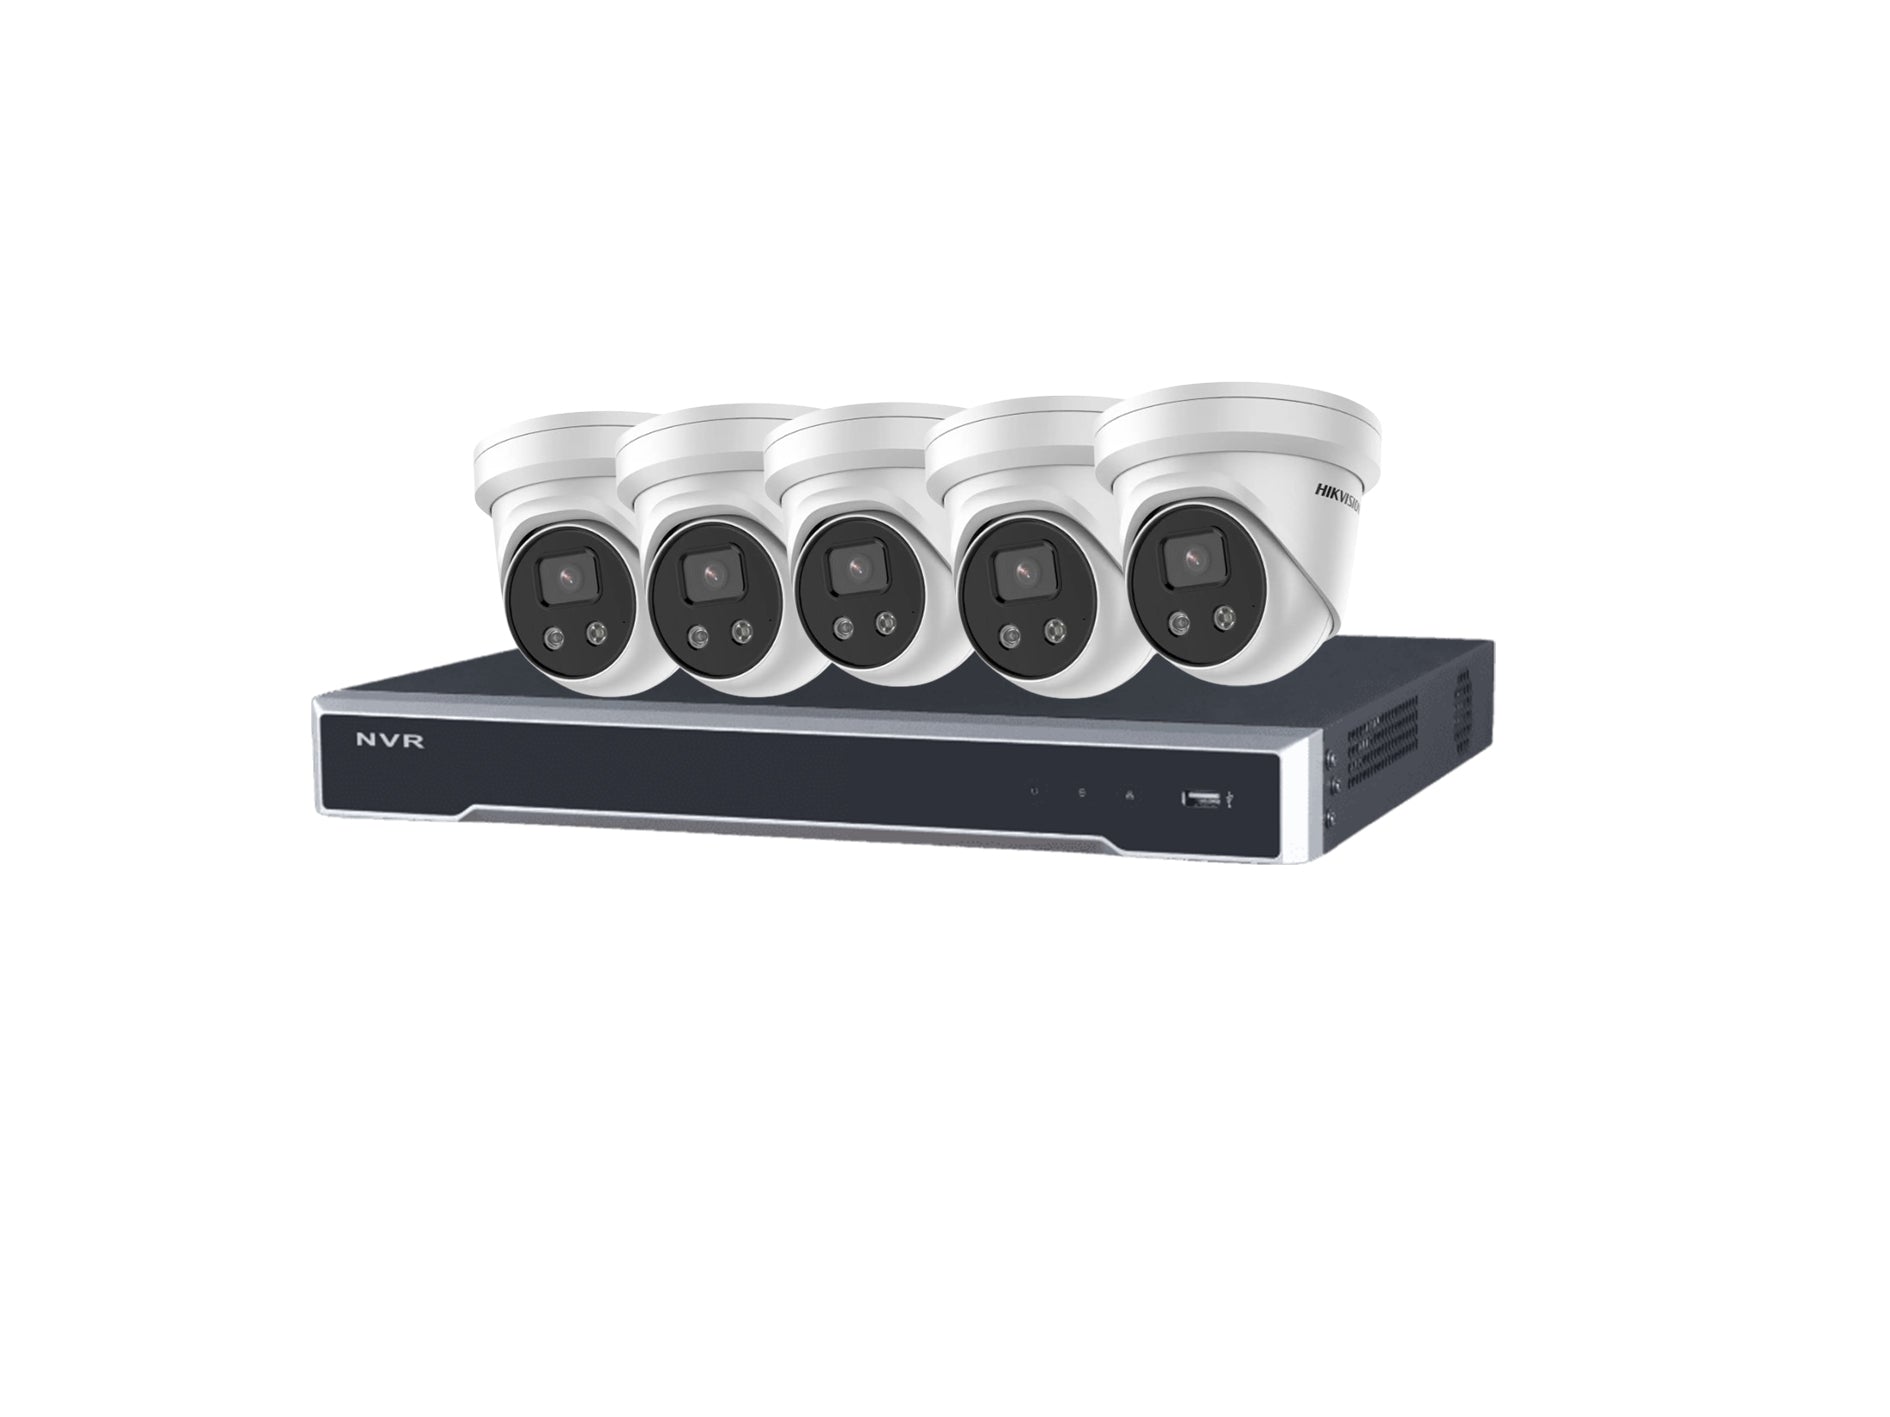 Hikvision 2CD2386G2-I2 8MP 6x cameras with 8 Channel NVR + HDD CCTV Kit